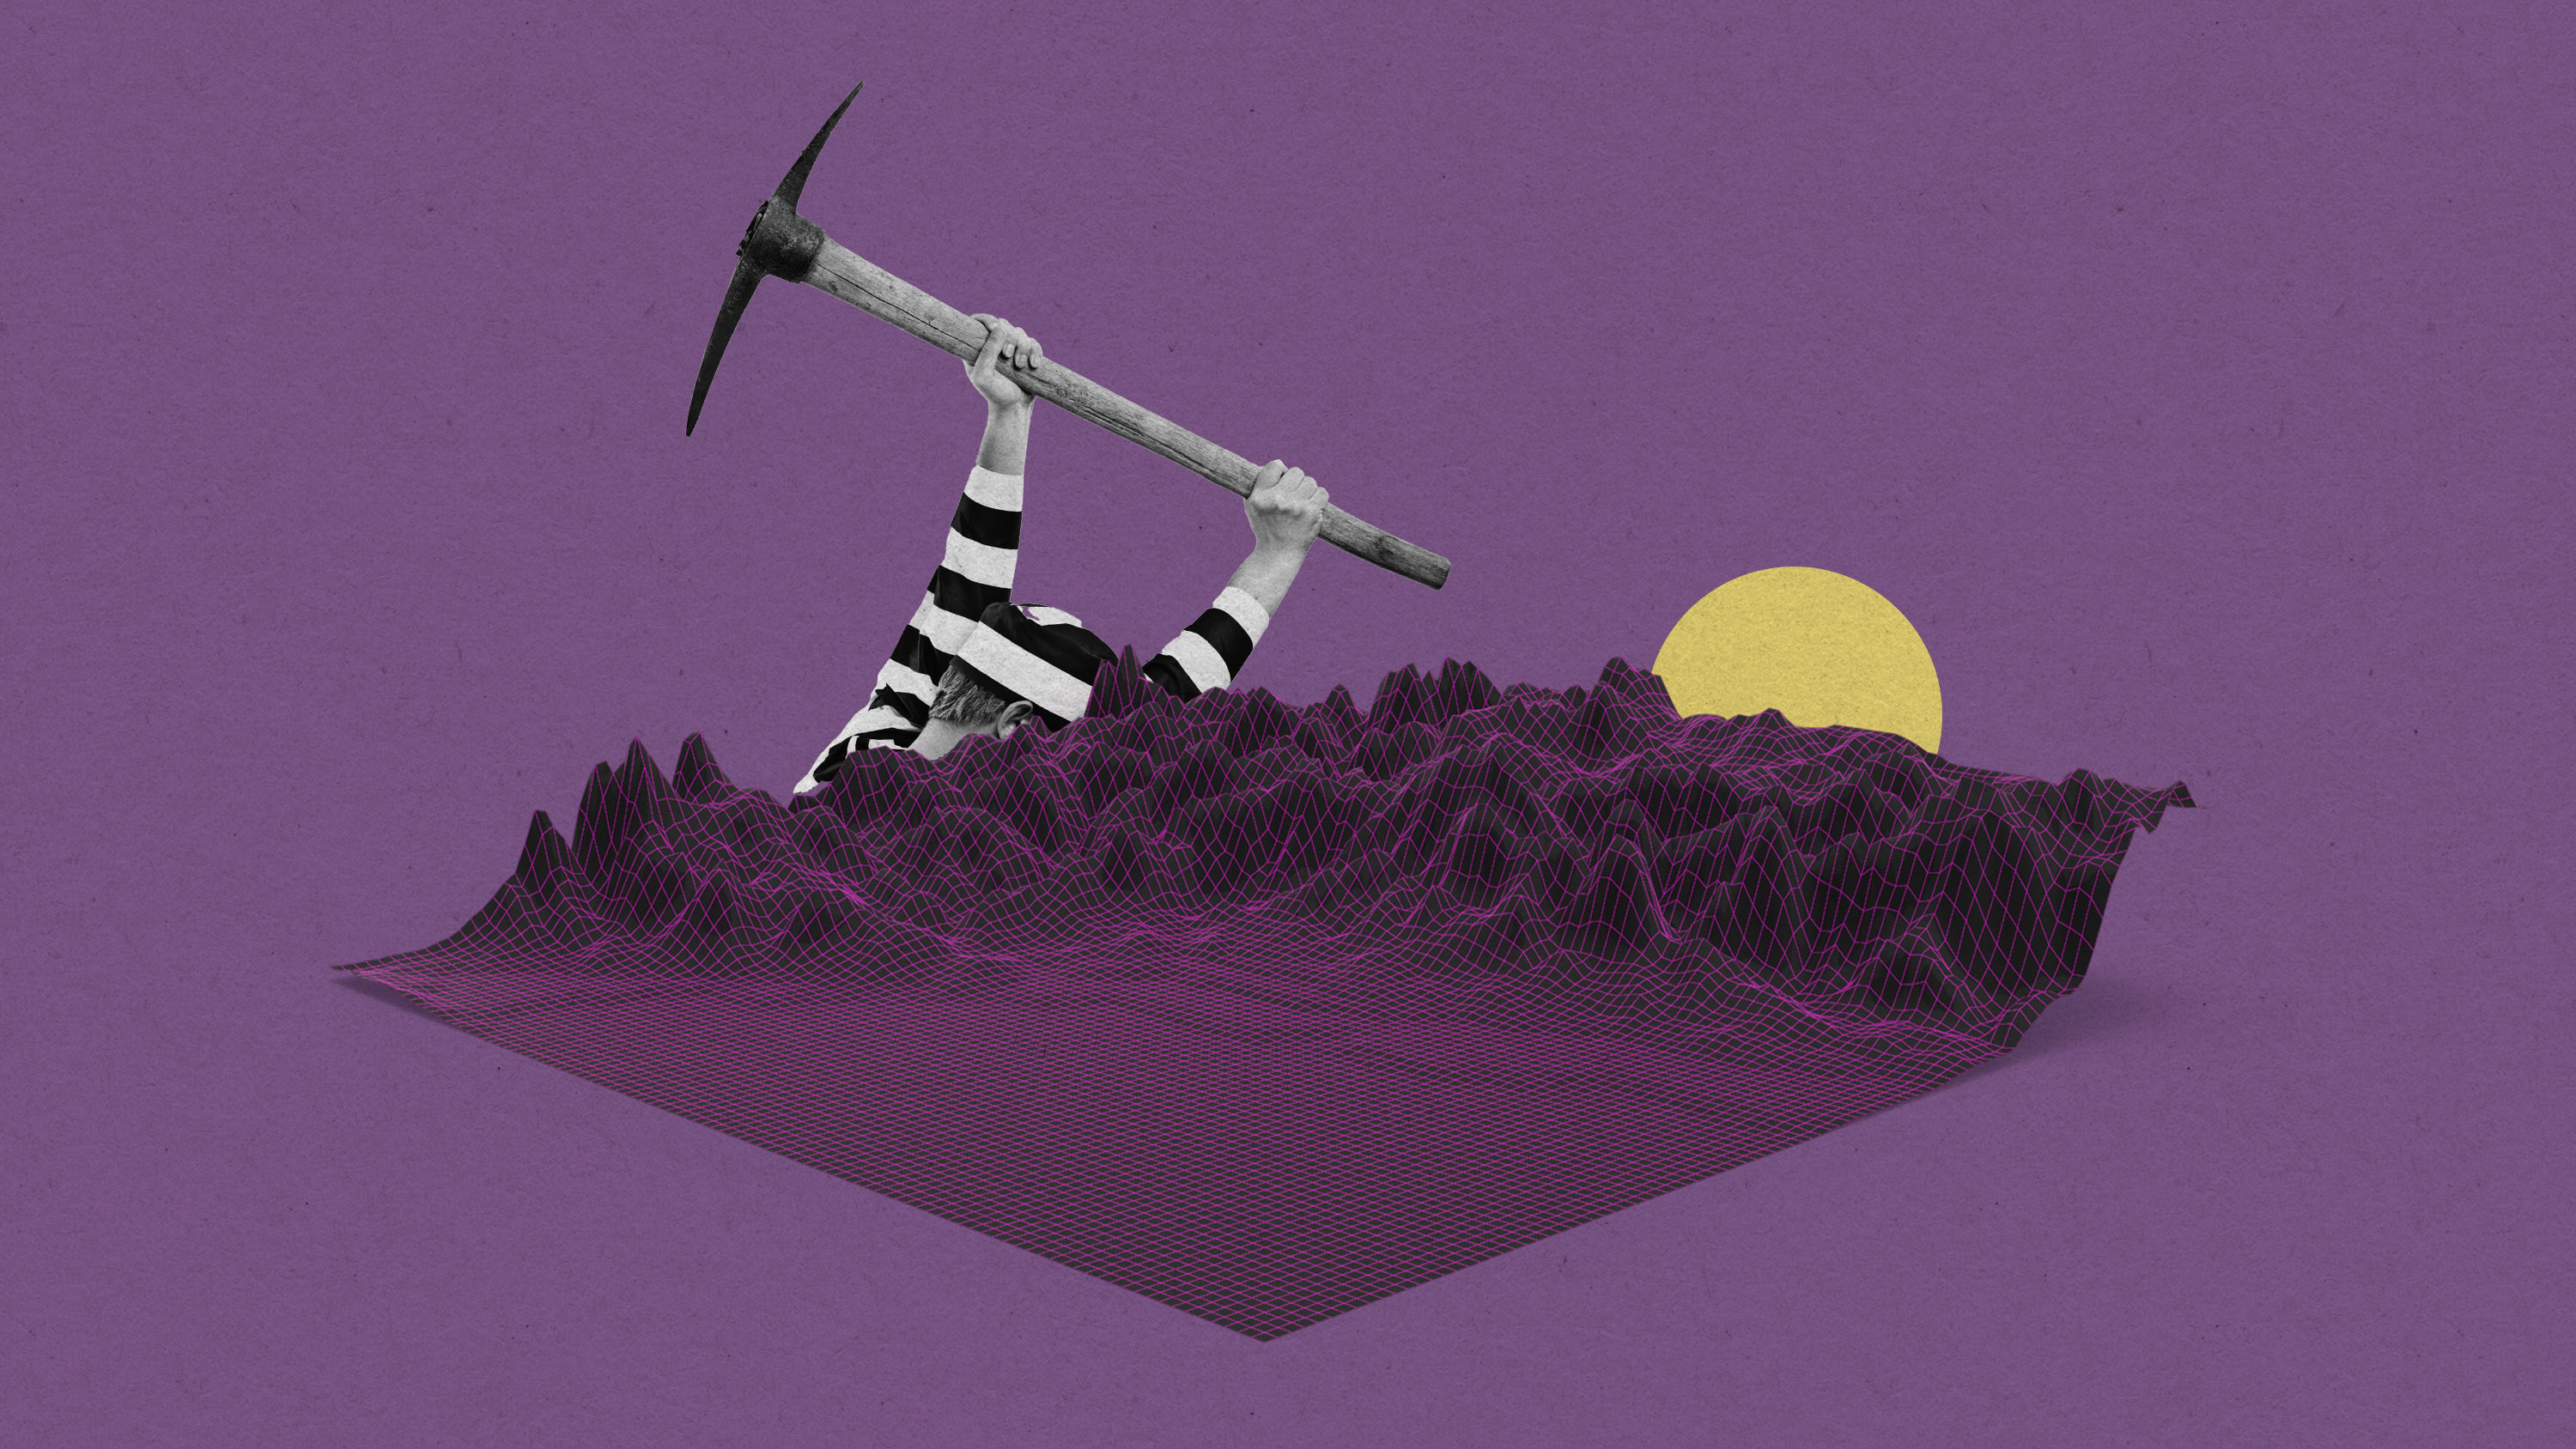 arms and top of head of a person in a striped prisoner suit swinging a pickaxe is obscured by a vaporwave landscape